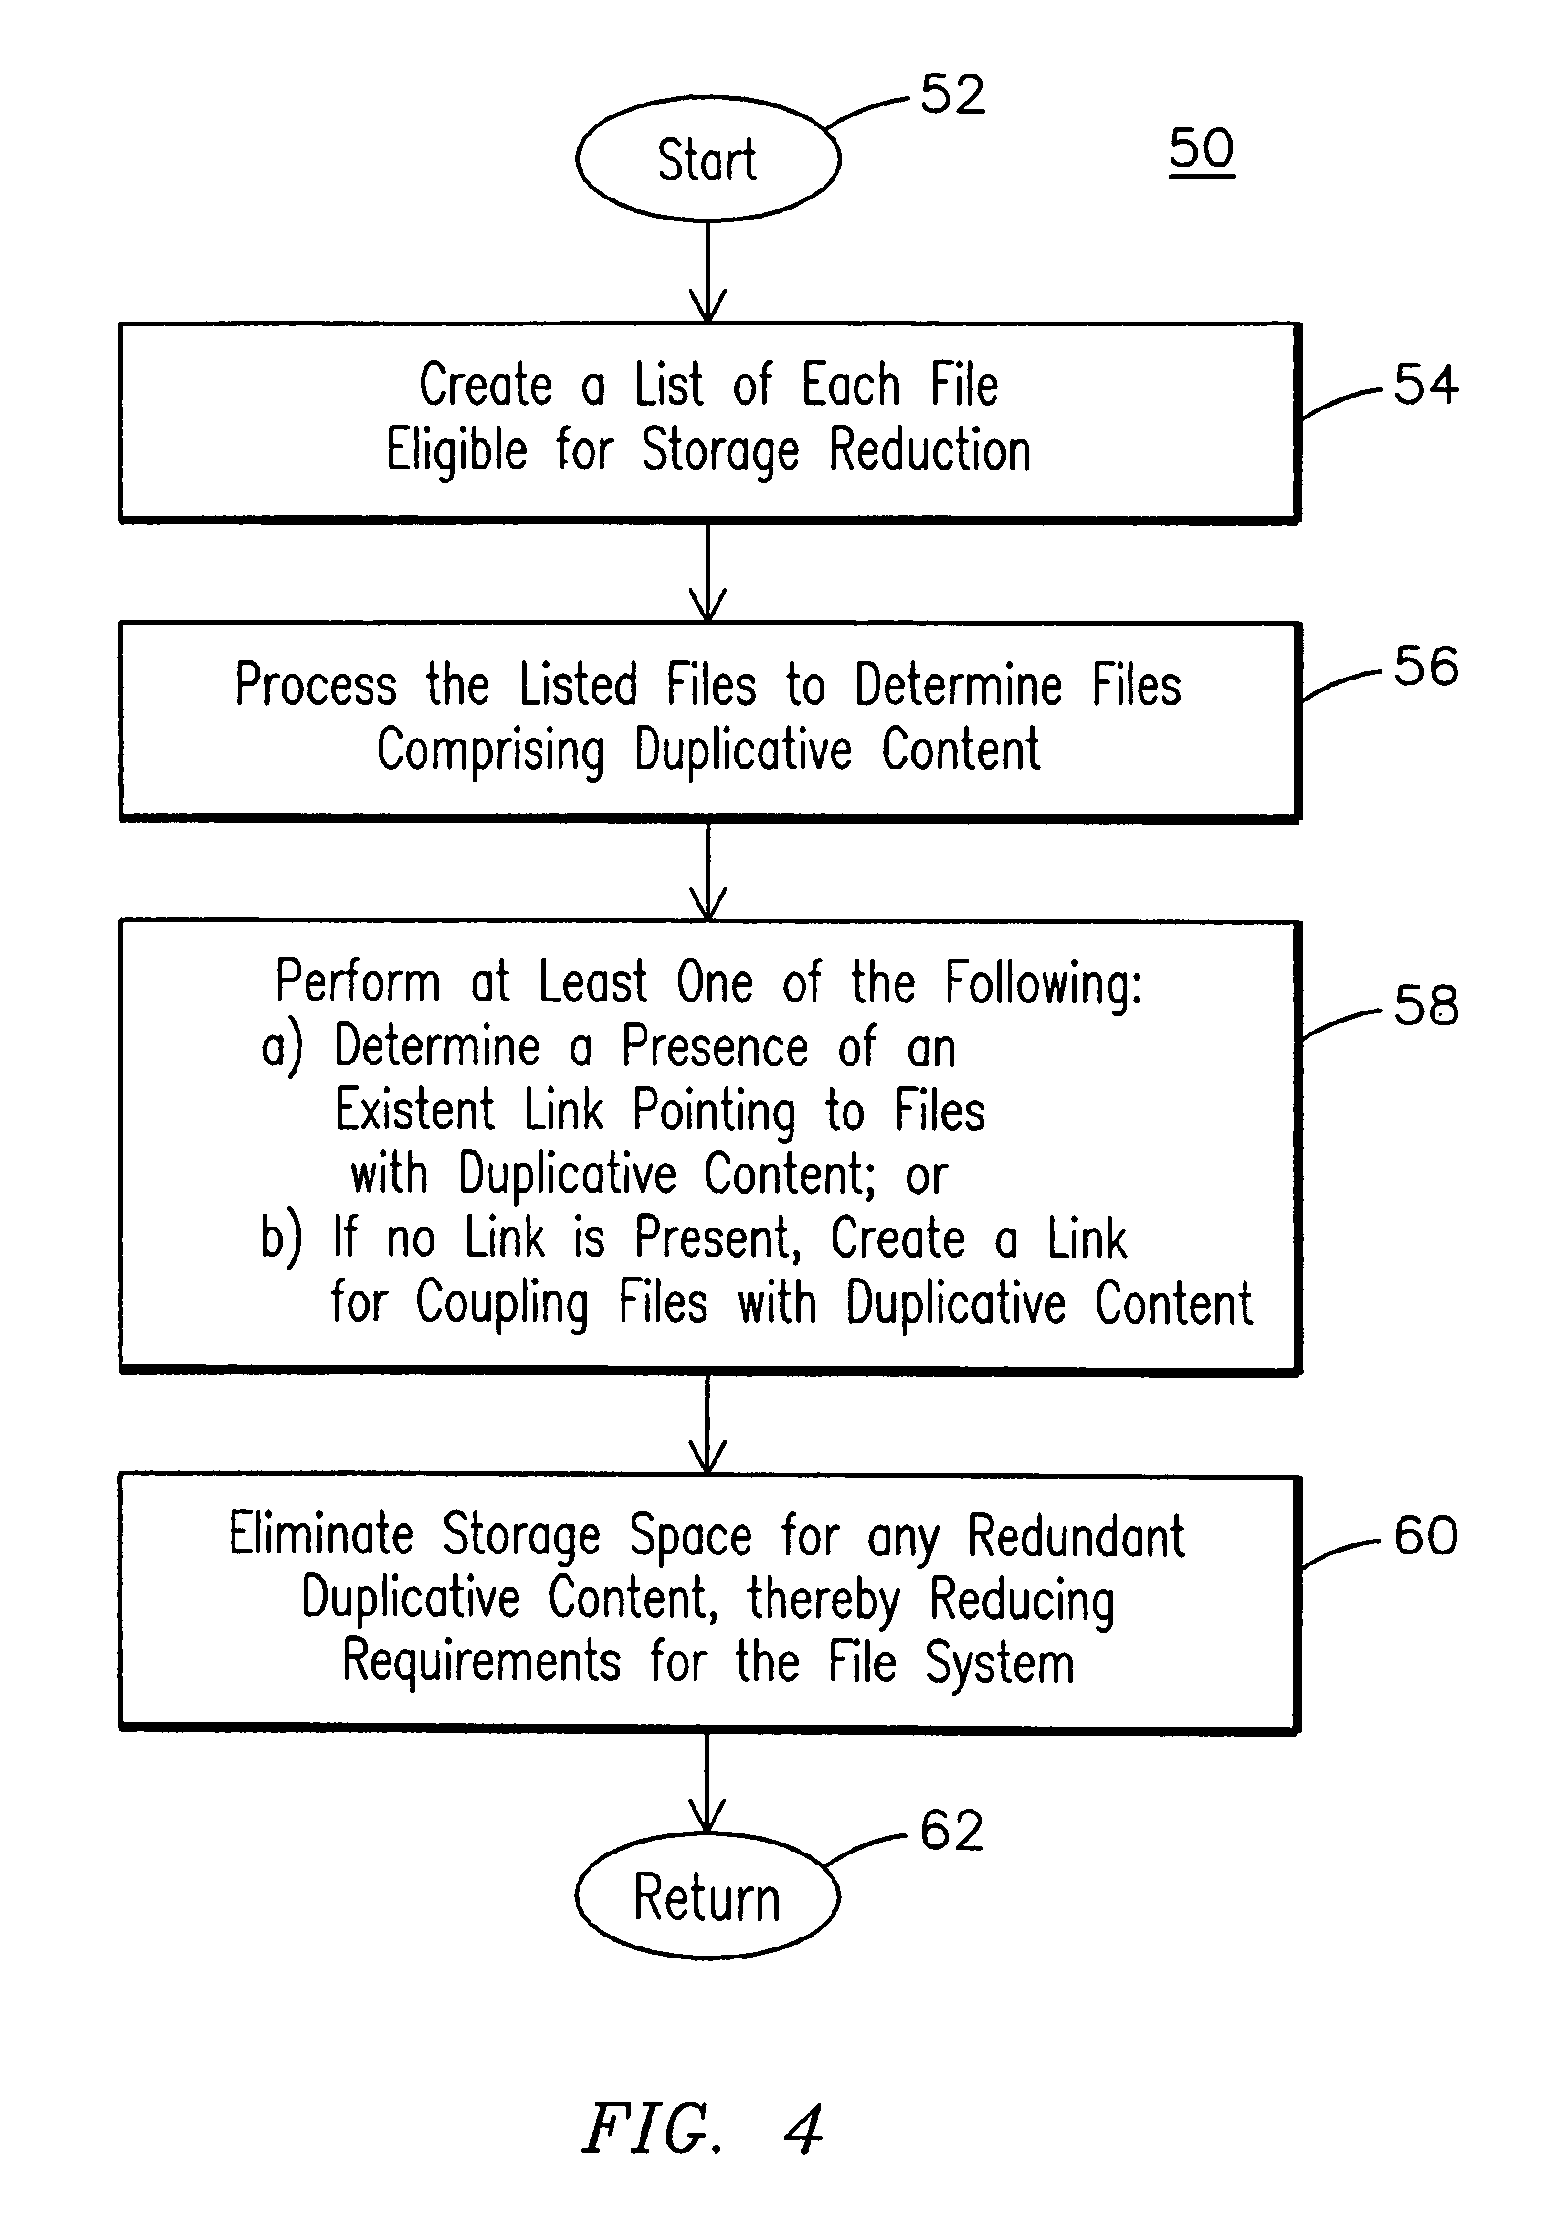 Method and computer program for reducing storage space requirements in a file system comprising linkable files